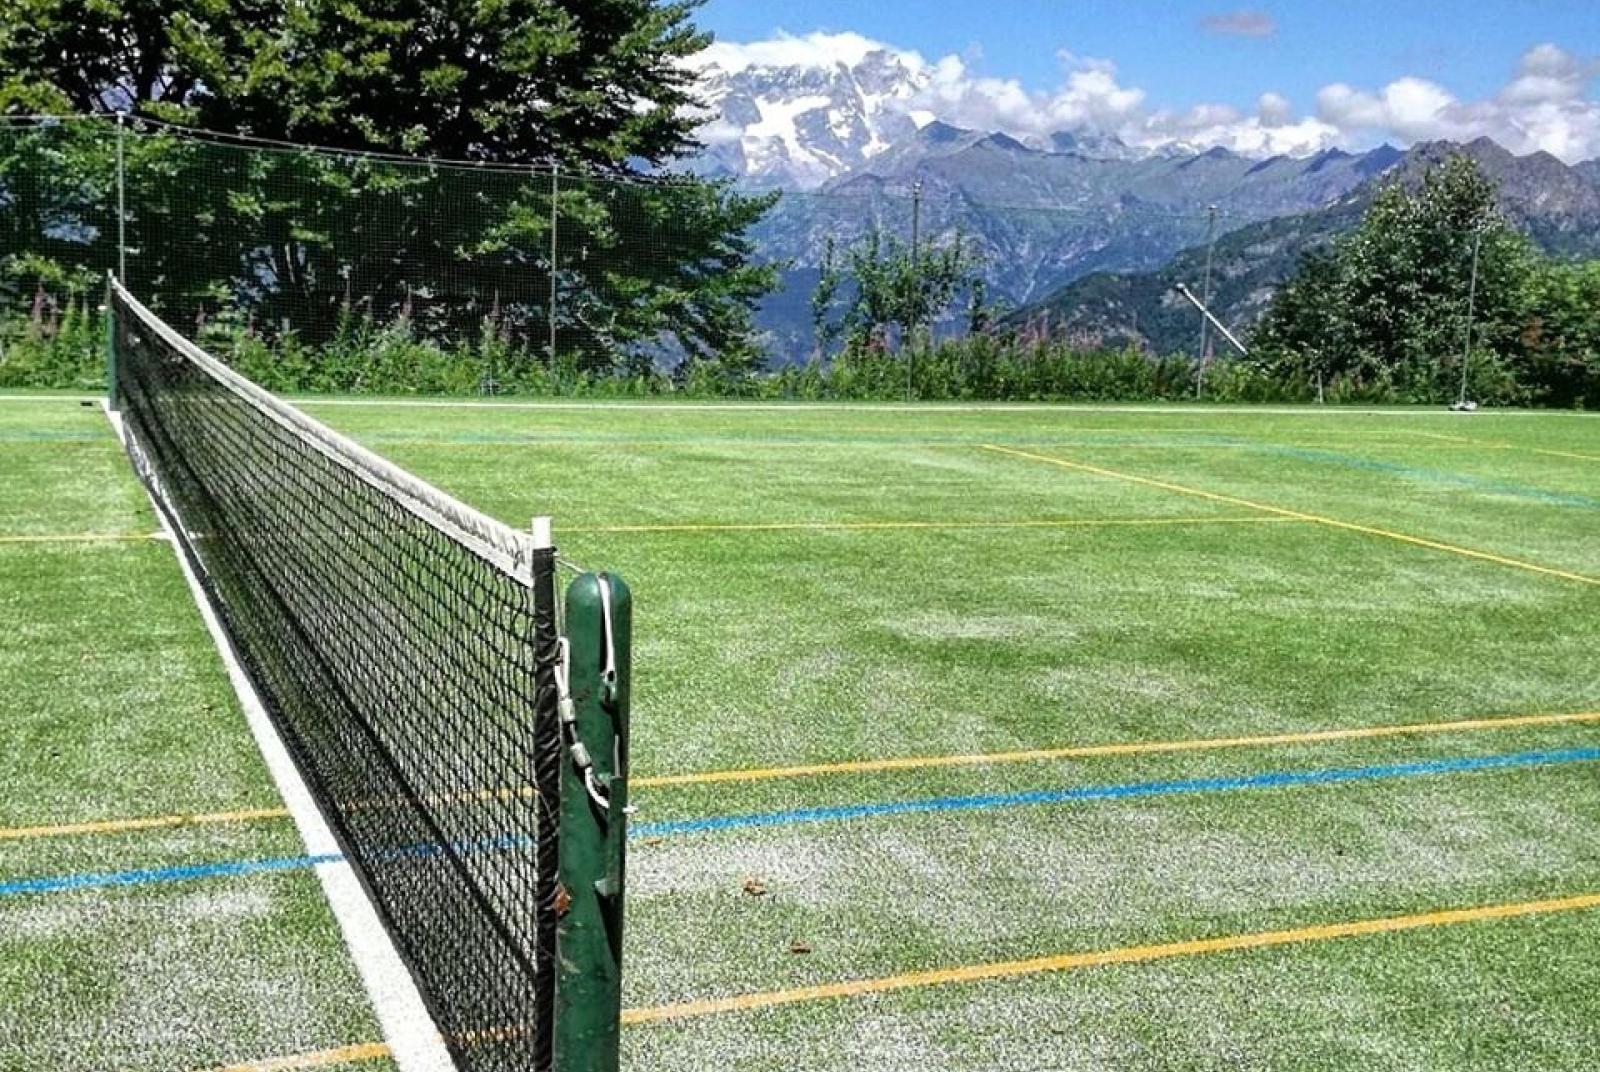 Tennis and Football in Mera